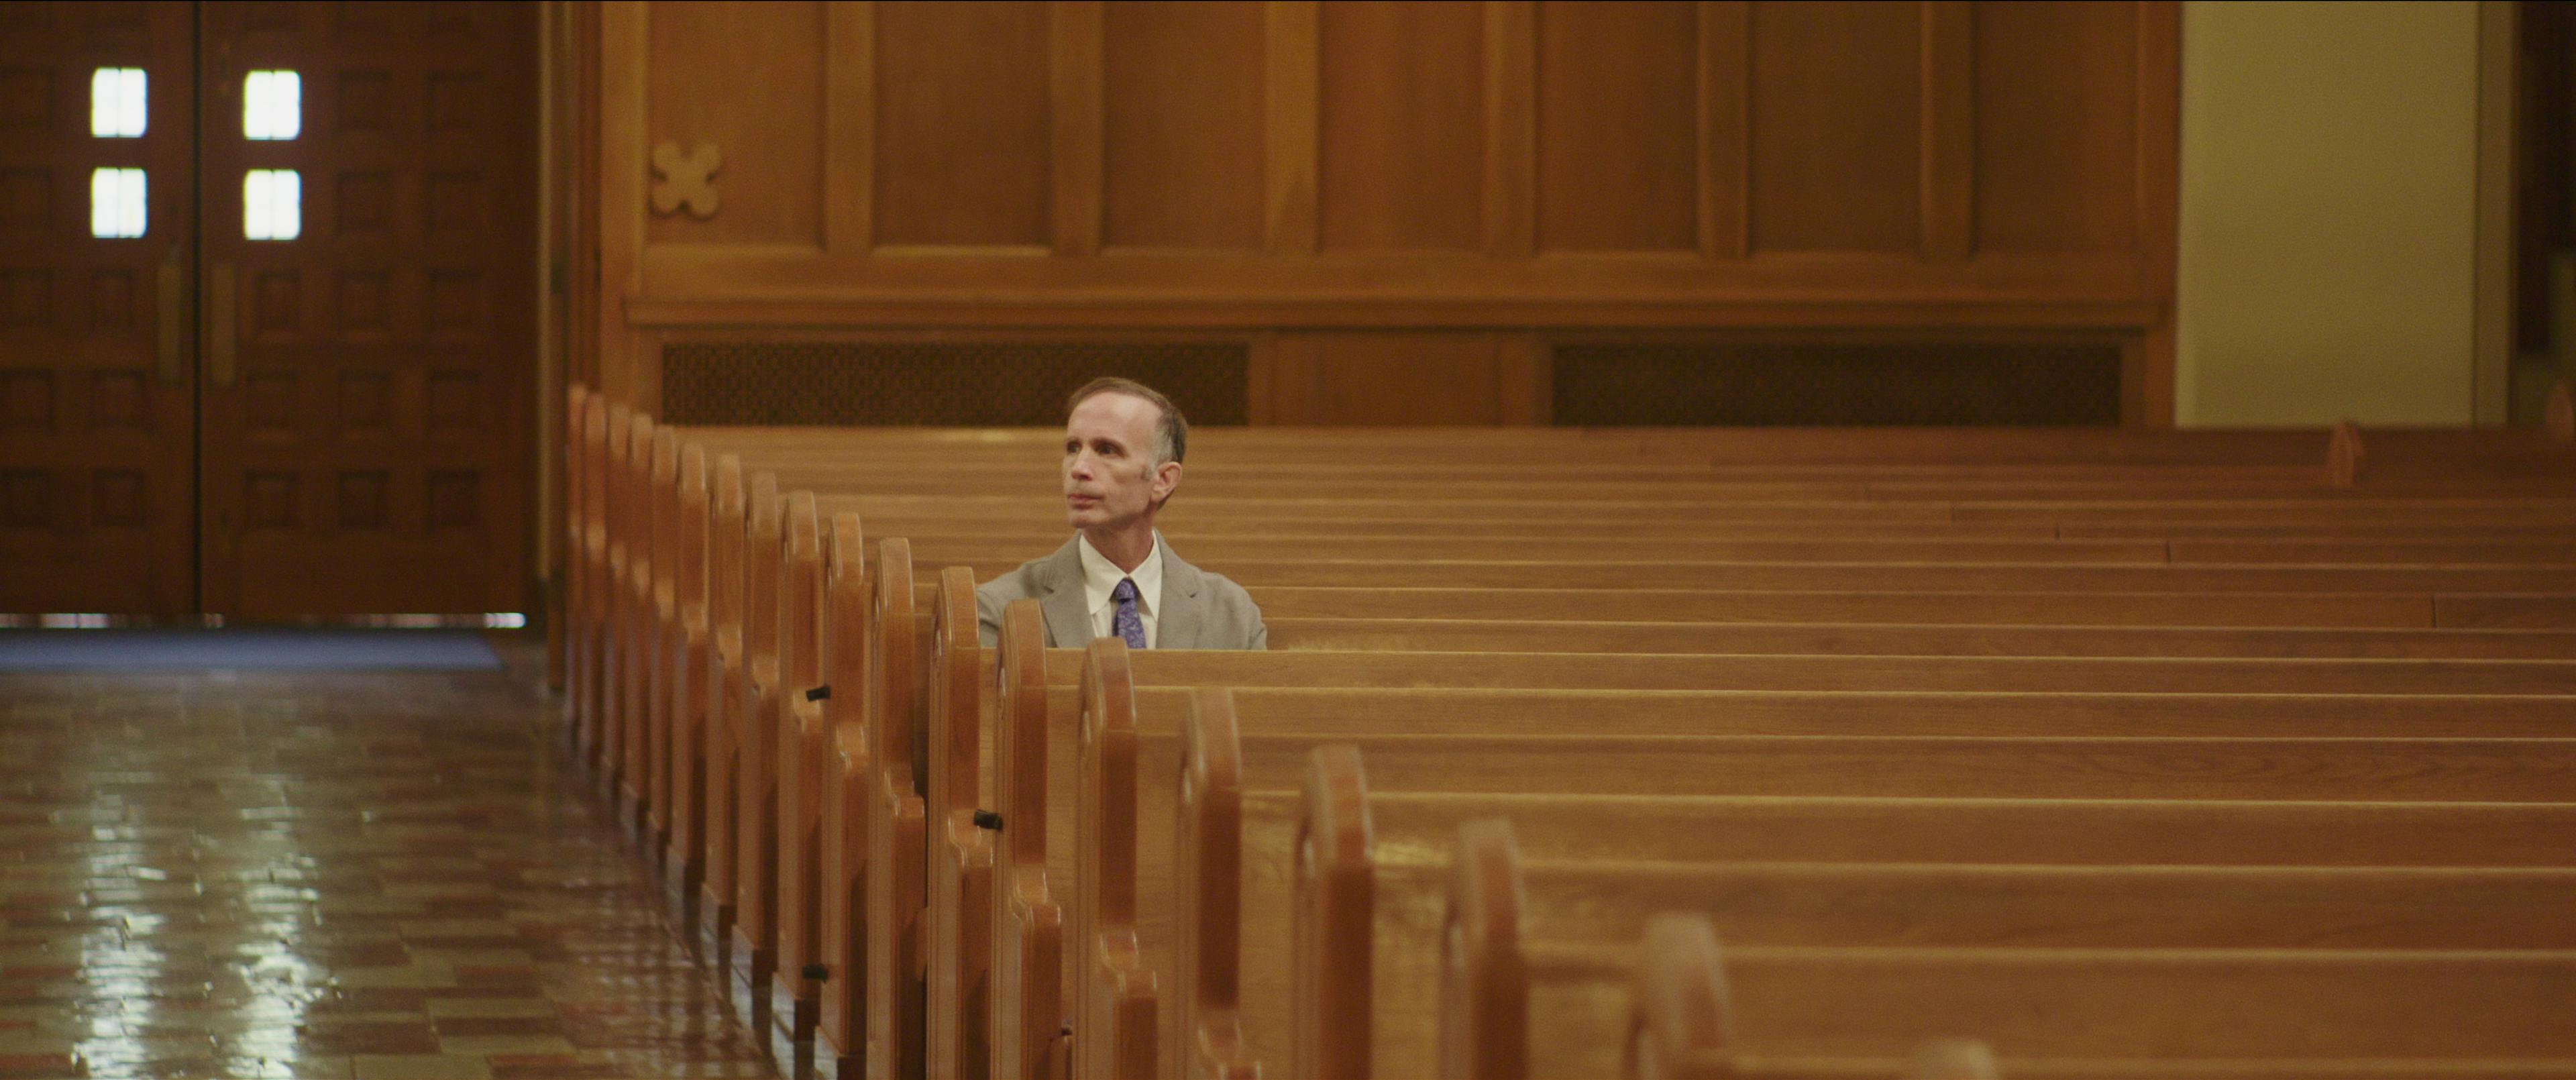 A man sits in otherwise empty church pews. He wears a light grey suit and purple tie. 